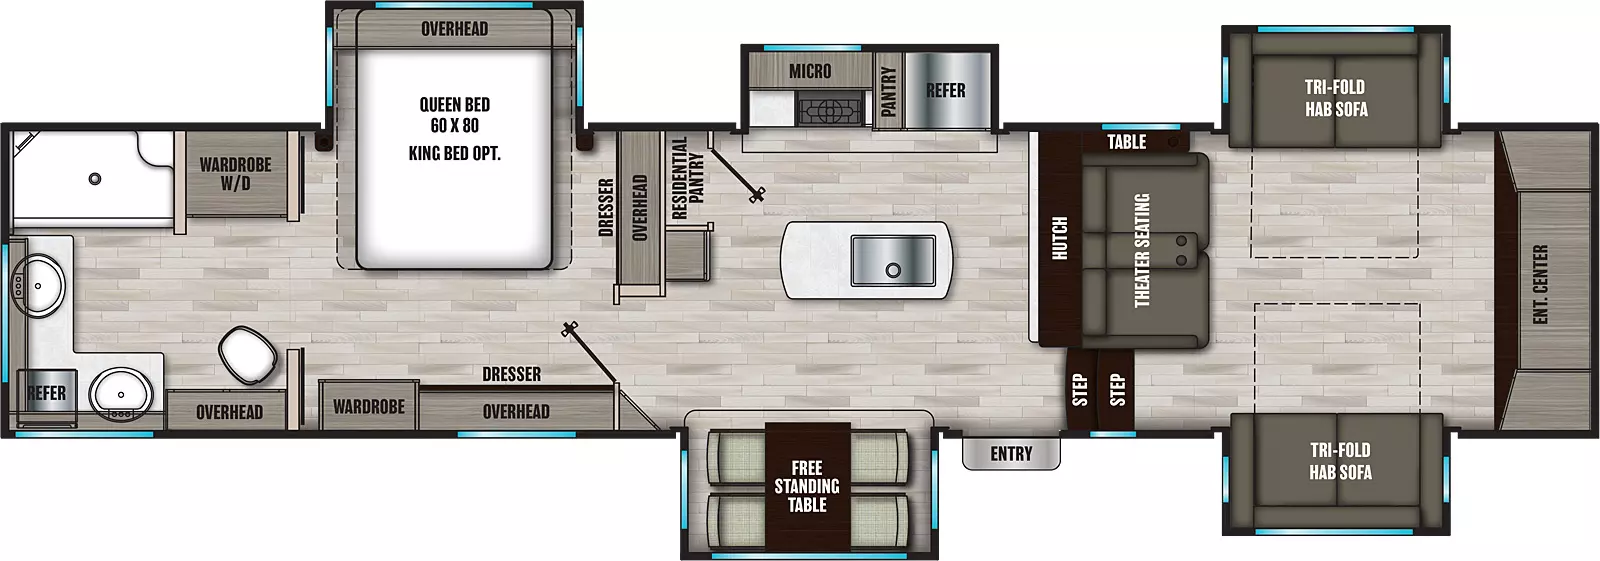 The 334FL has five slideouts and one entry. Exterior features a rear small refrigerator. Interior layout front to back: front living room with front entertainment center with theater seat and table opposite, and opposing tri-fold hide-a-bed sofa slide outs; two steps down into the kitchen and entry with door side free-standing table, kitchen island with sink, hutch along inner wall, off-door side slideout with refrigerator, pantry, microwave, and kitchen counter, and residential pantry along inner wall opposite hutch; bedroom with dresser and overhead cabinet along inner wall, off-door side queen bed slideout with overhead cabinet, and door side dresser with overhead cabinet and wardrobe; rear full bathroom with wardrobe washer/dryer. Optional king bed available in place of queen bed.